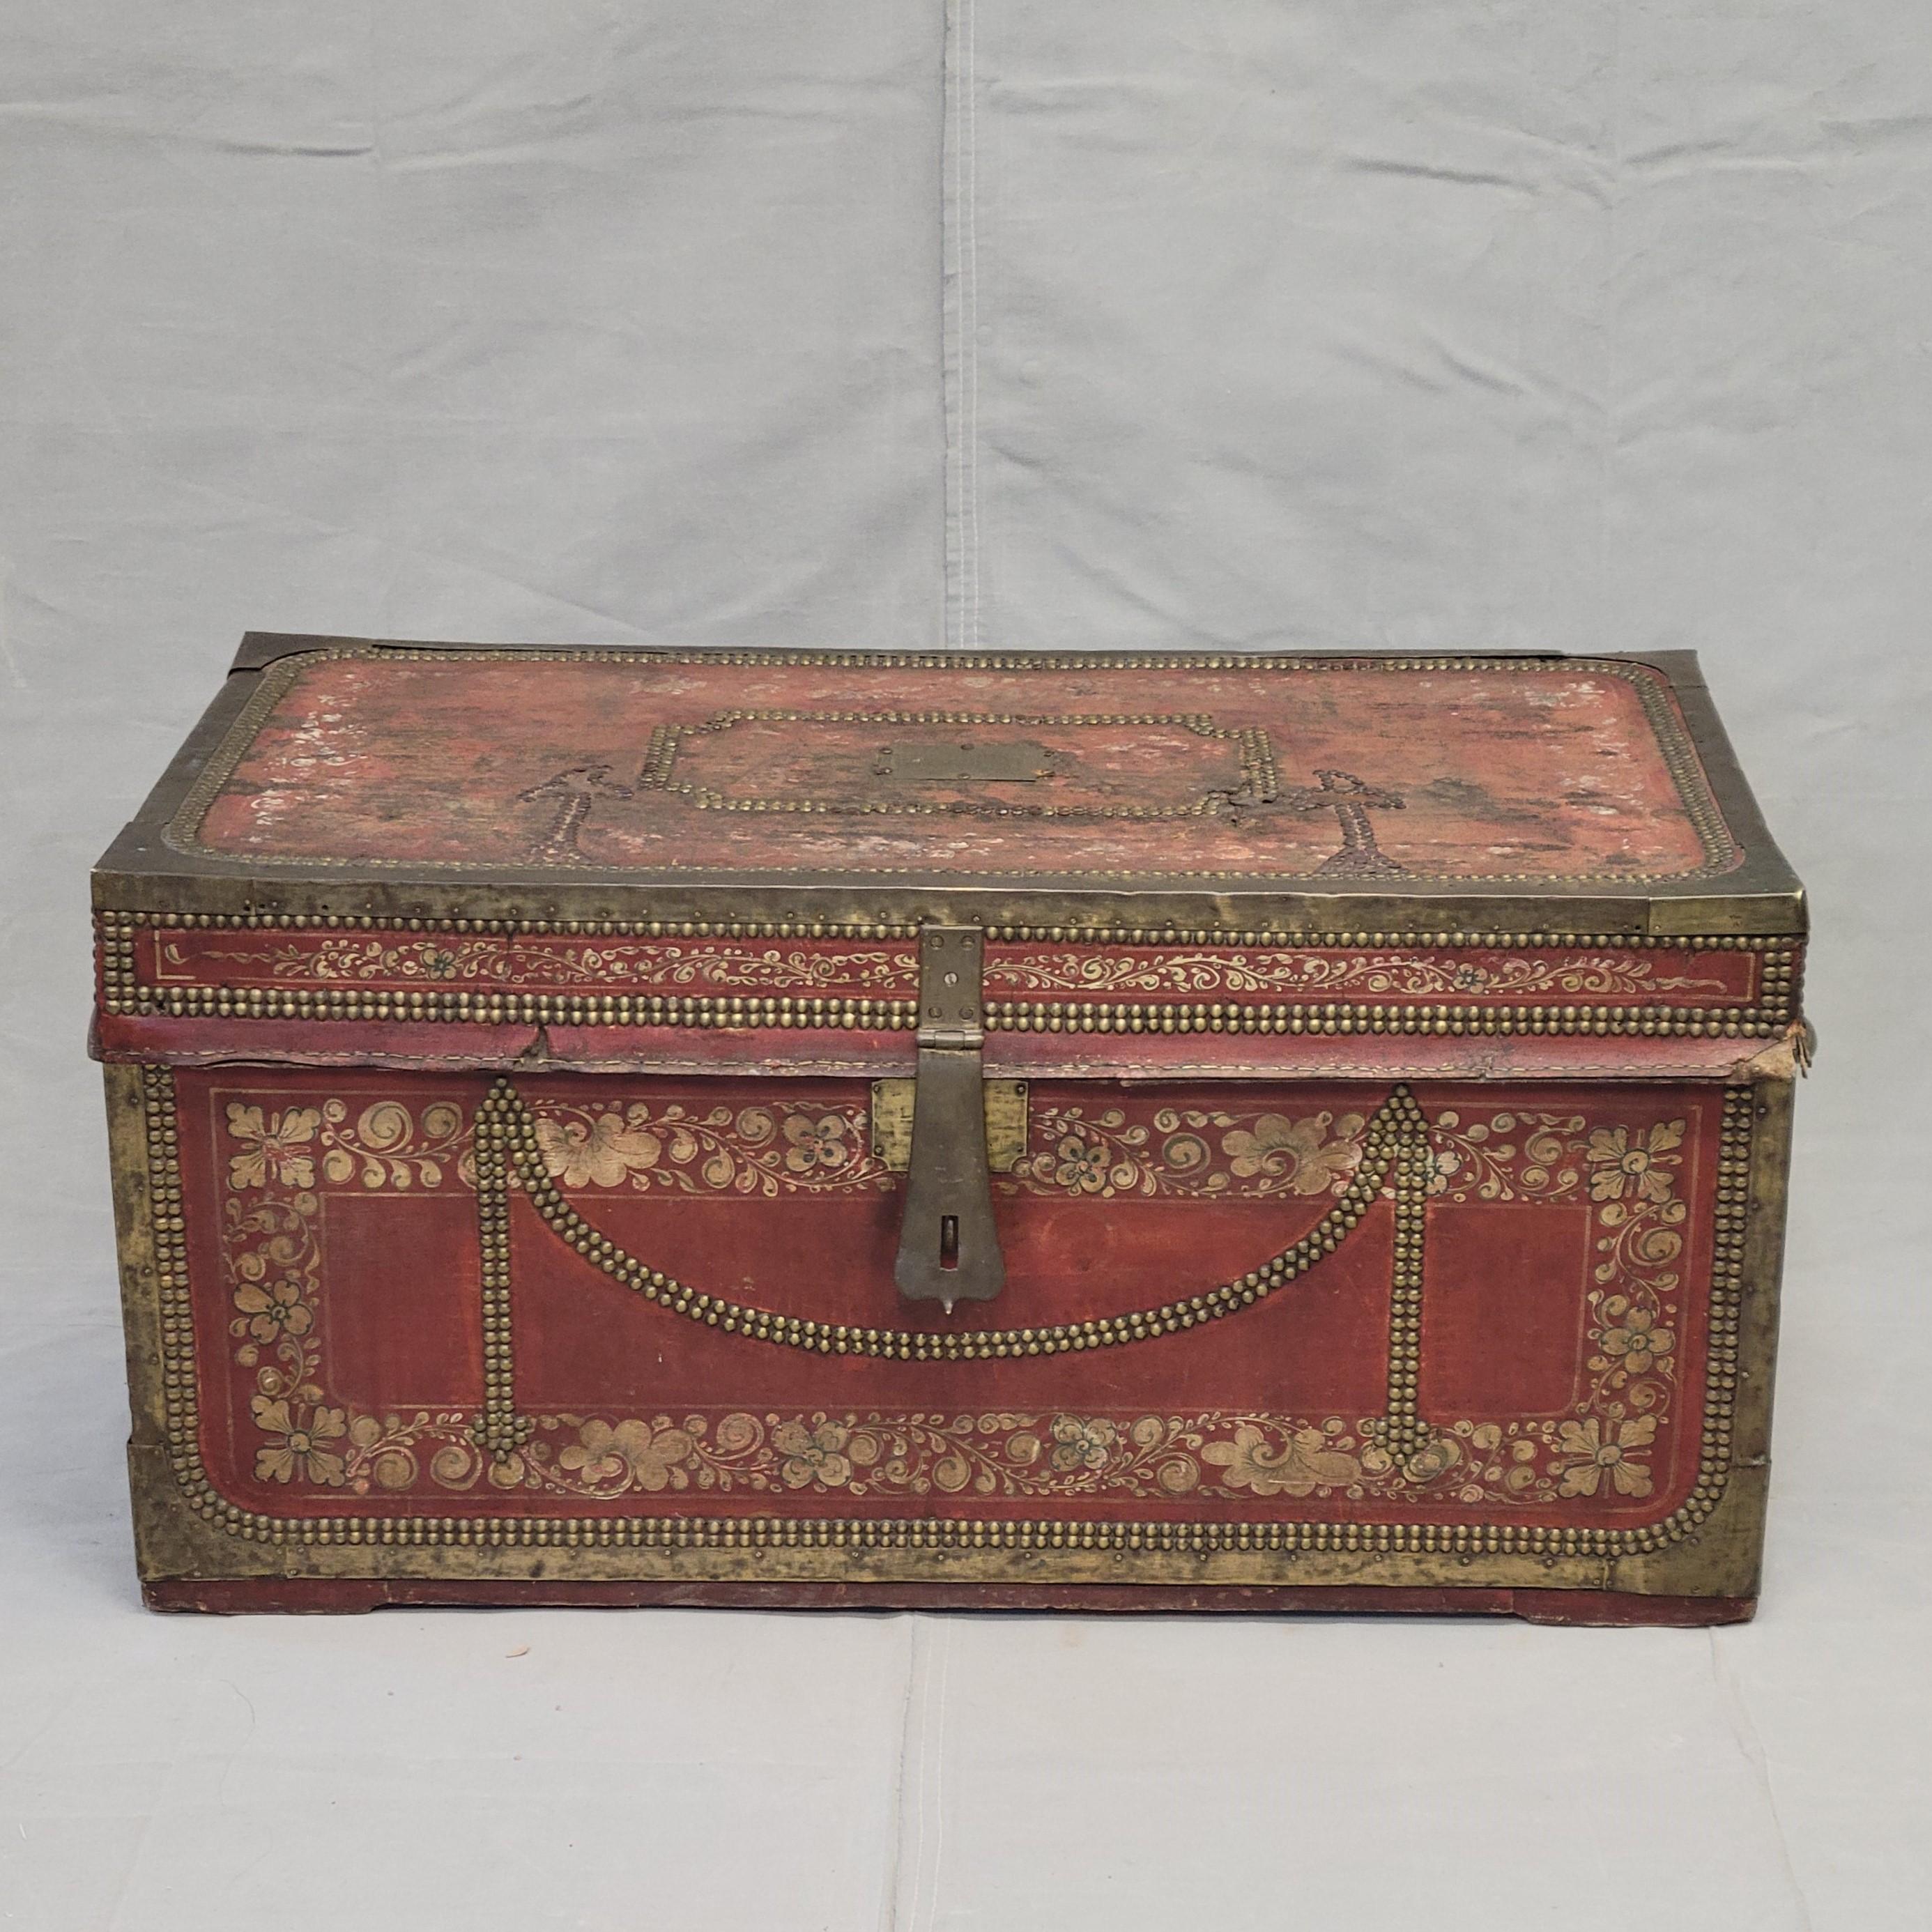 A beautiful, antique (mid 1800s) Chinese red leather and brass over camphor wood export trade trunk offers ample storage and could be used as a coffee table or accent piece. It is a gorgeous, rich red color with cream colored floral painted accents